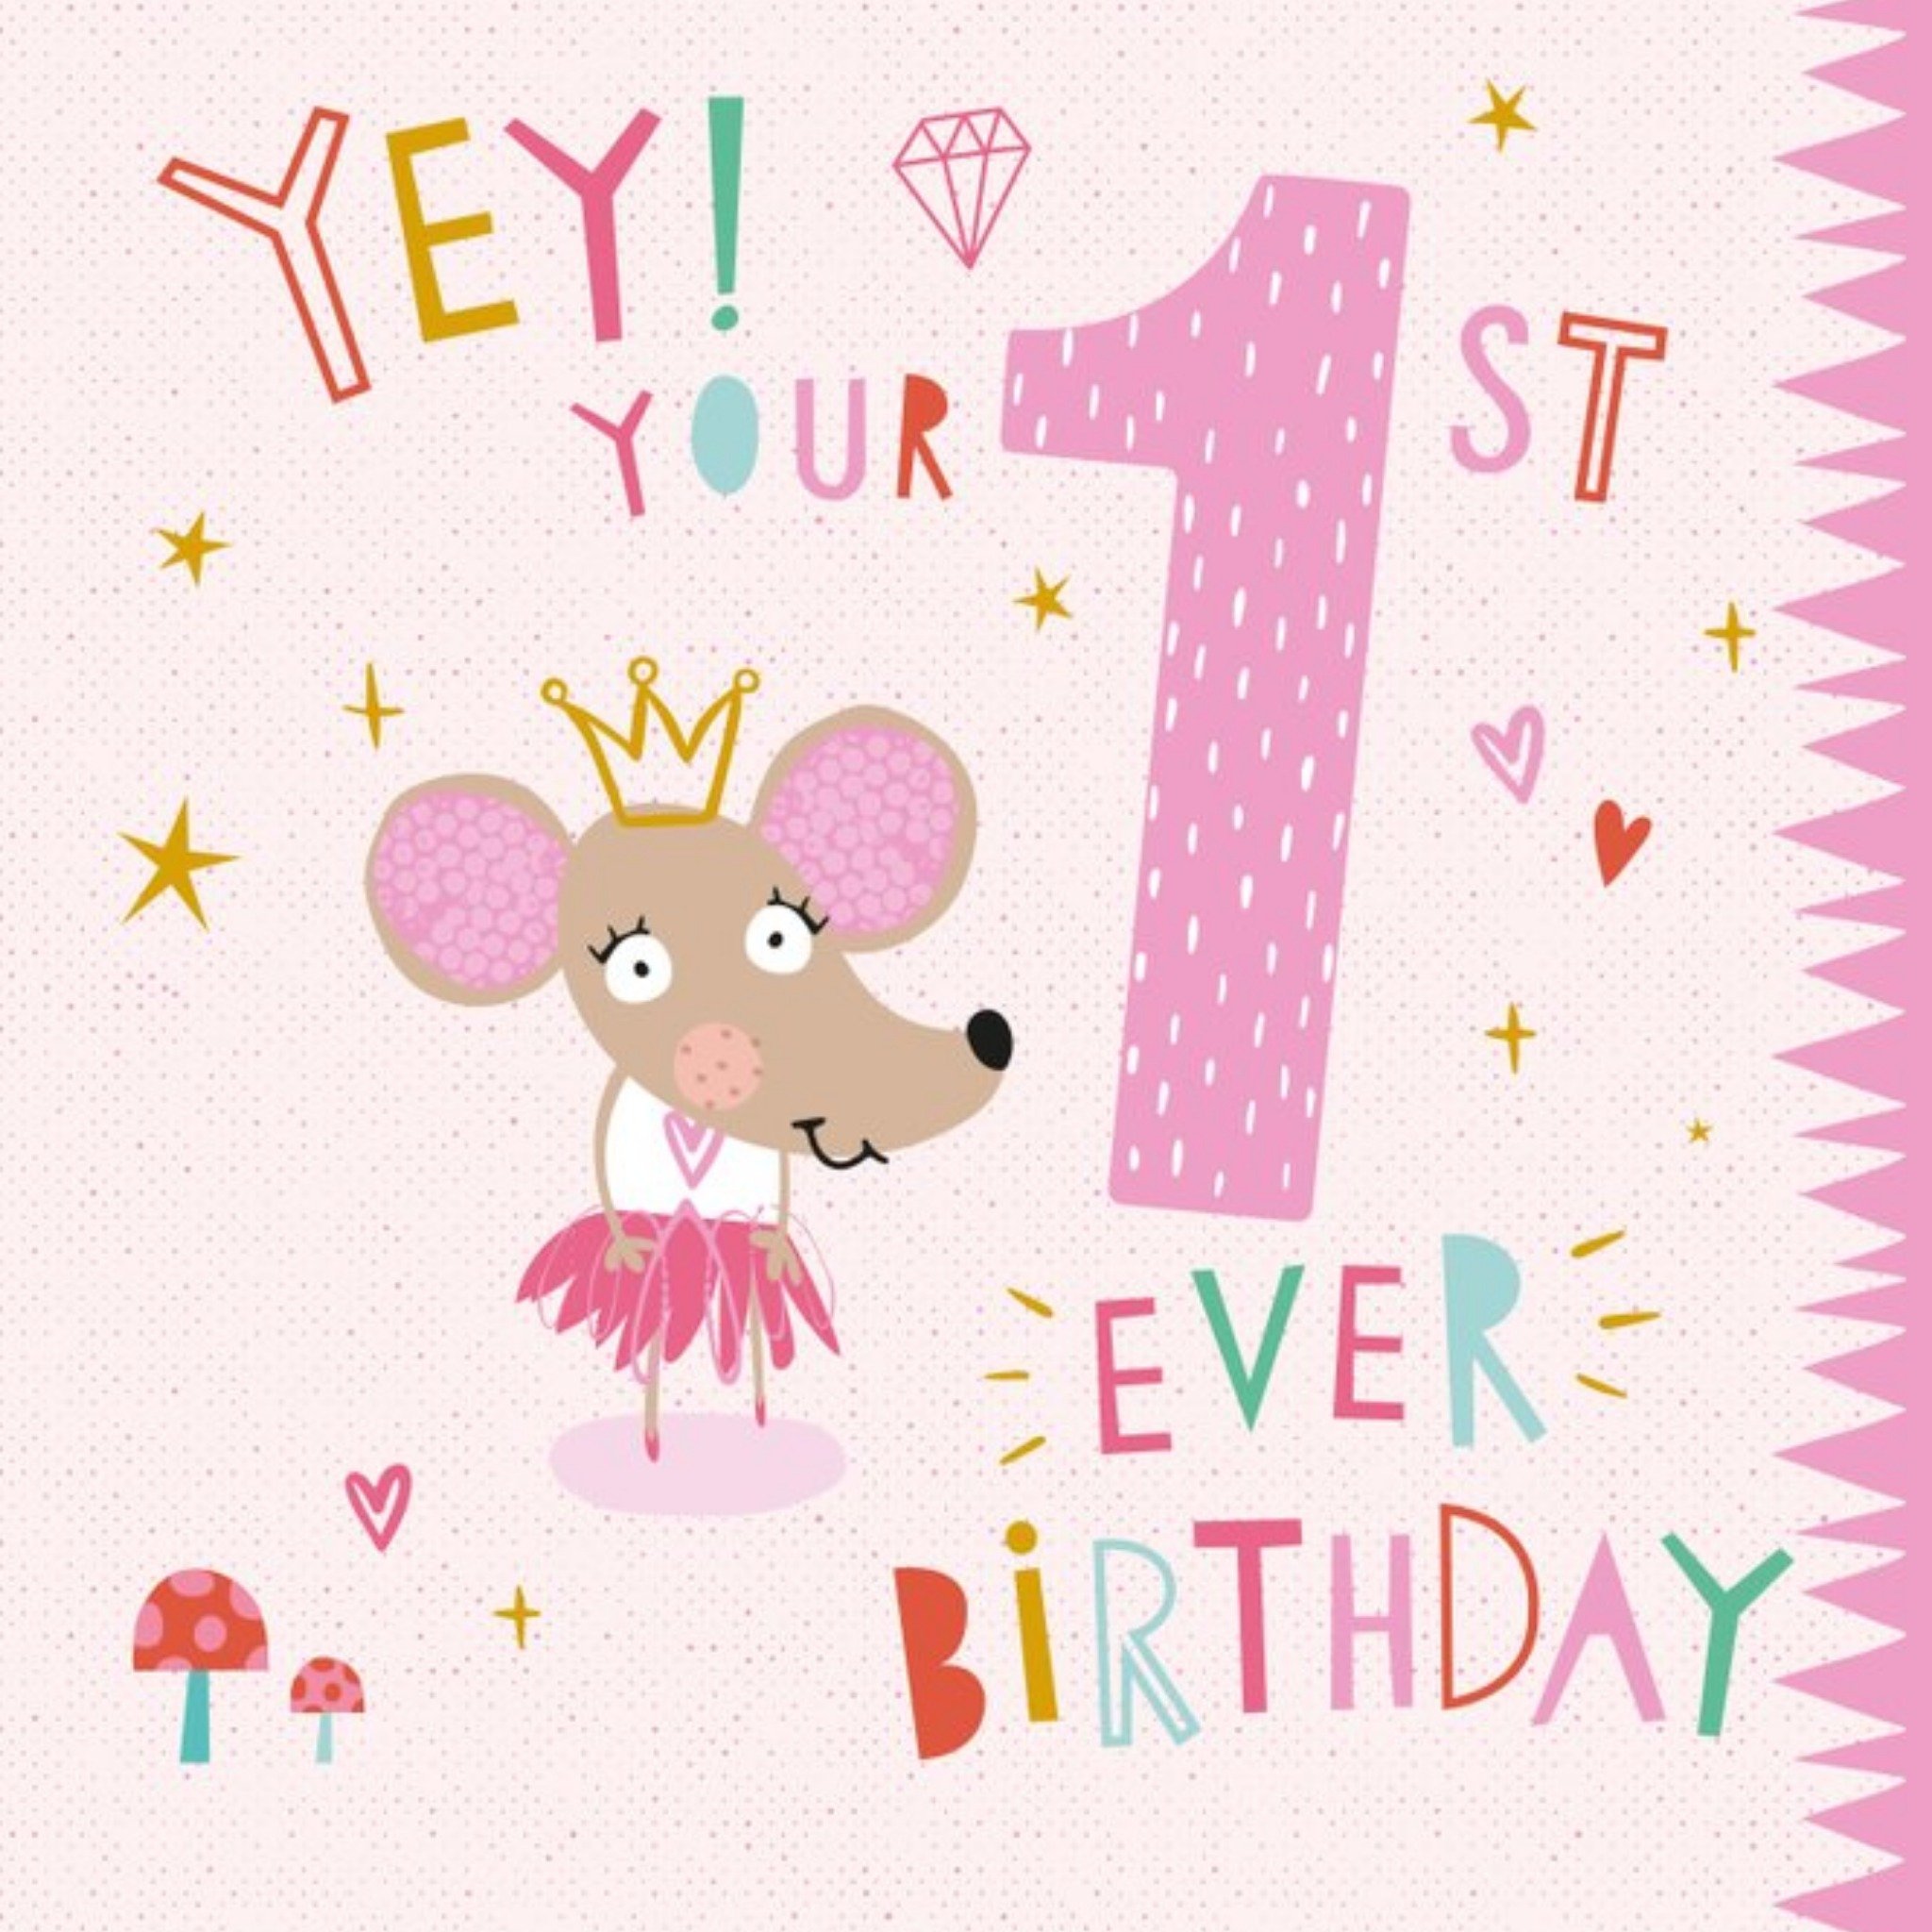 Moonpig Yay Your First Ever Birthday Mouse Card, Square